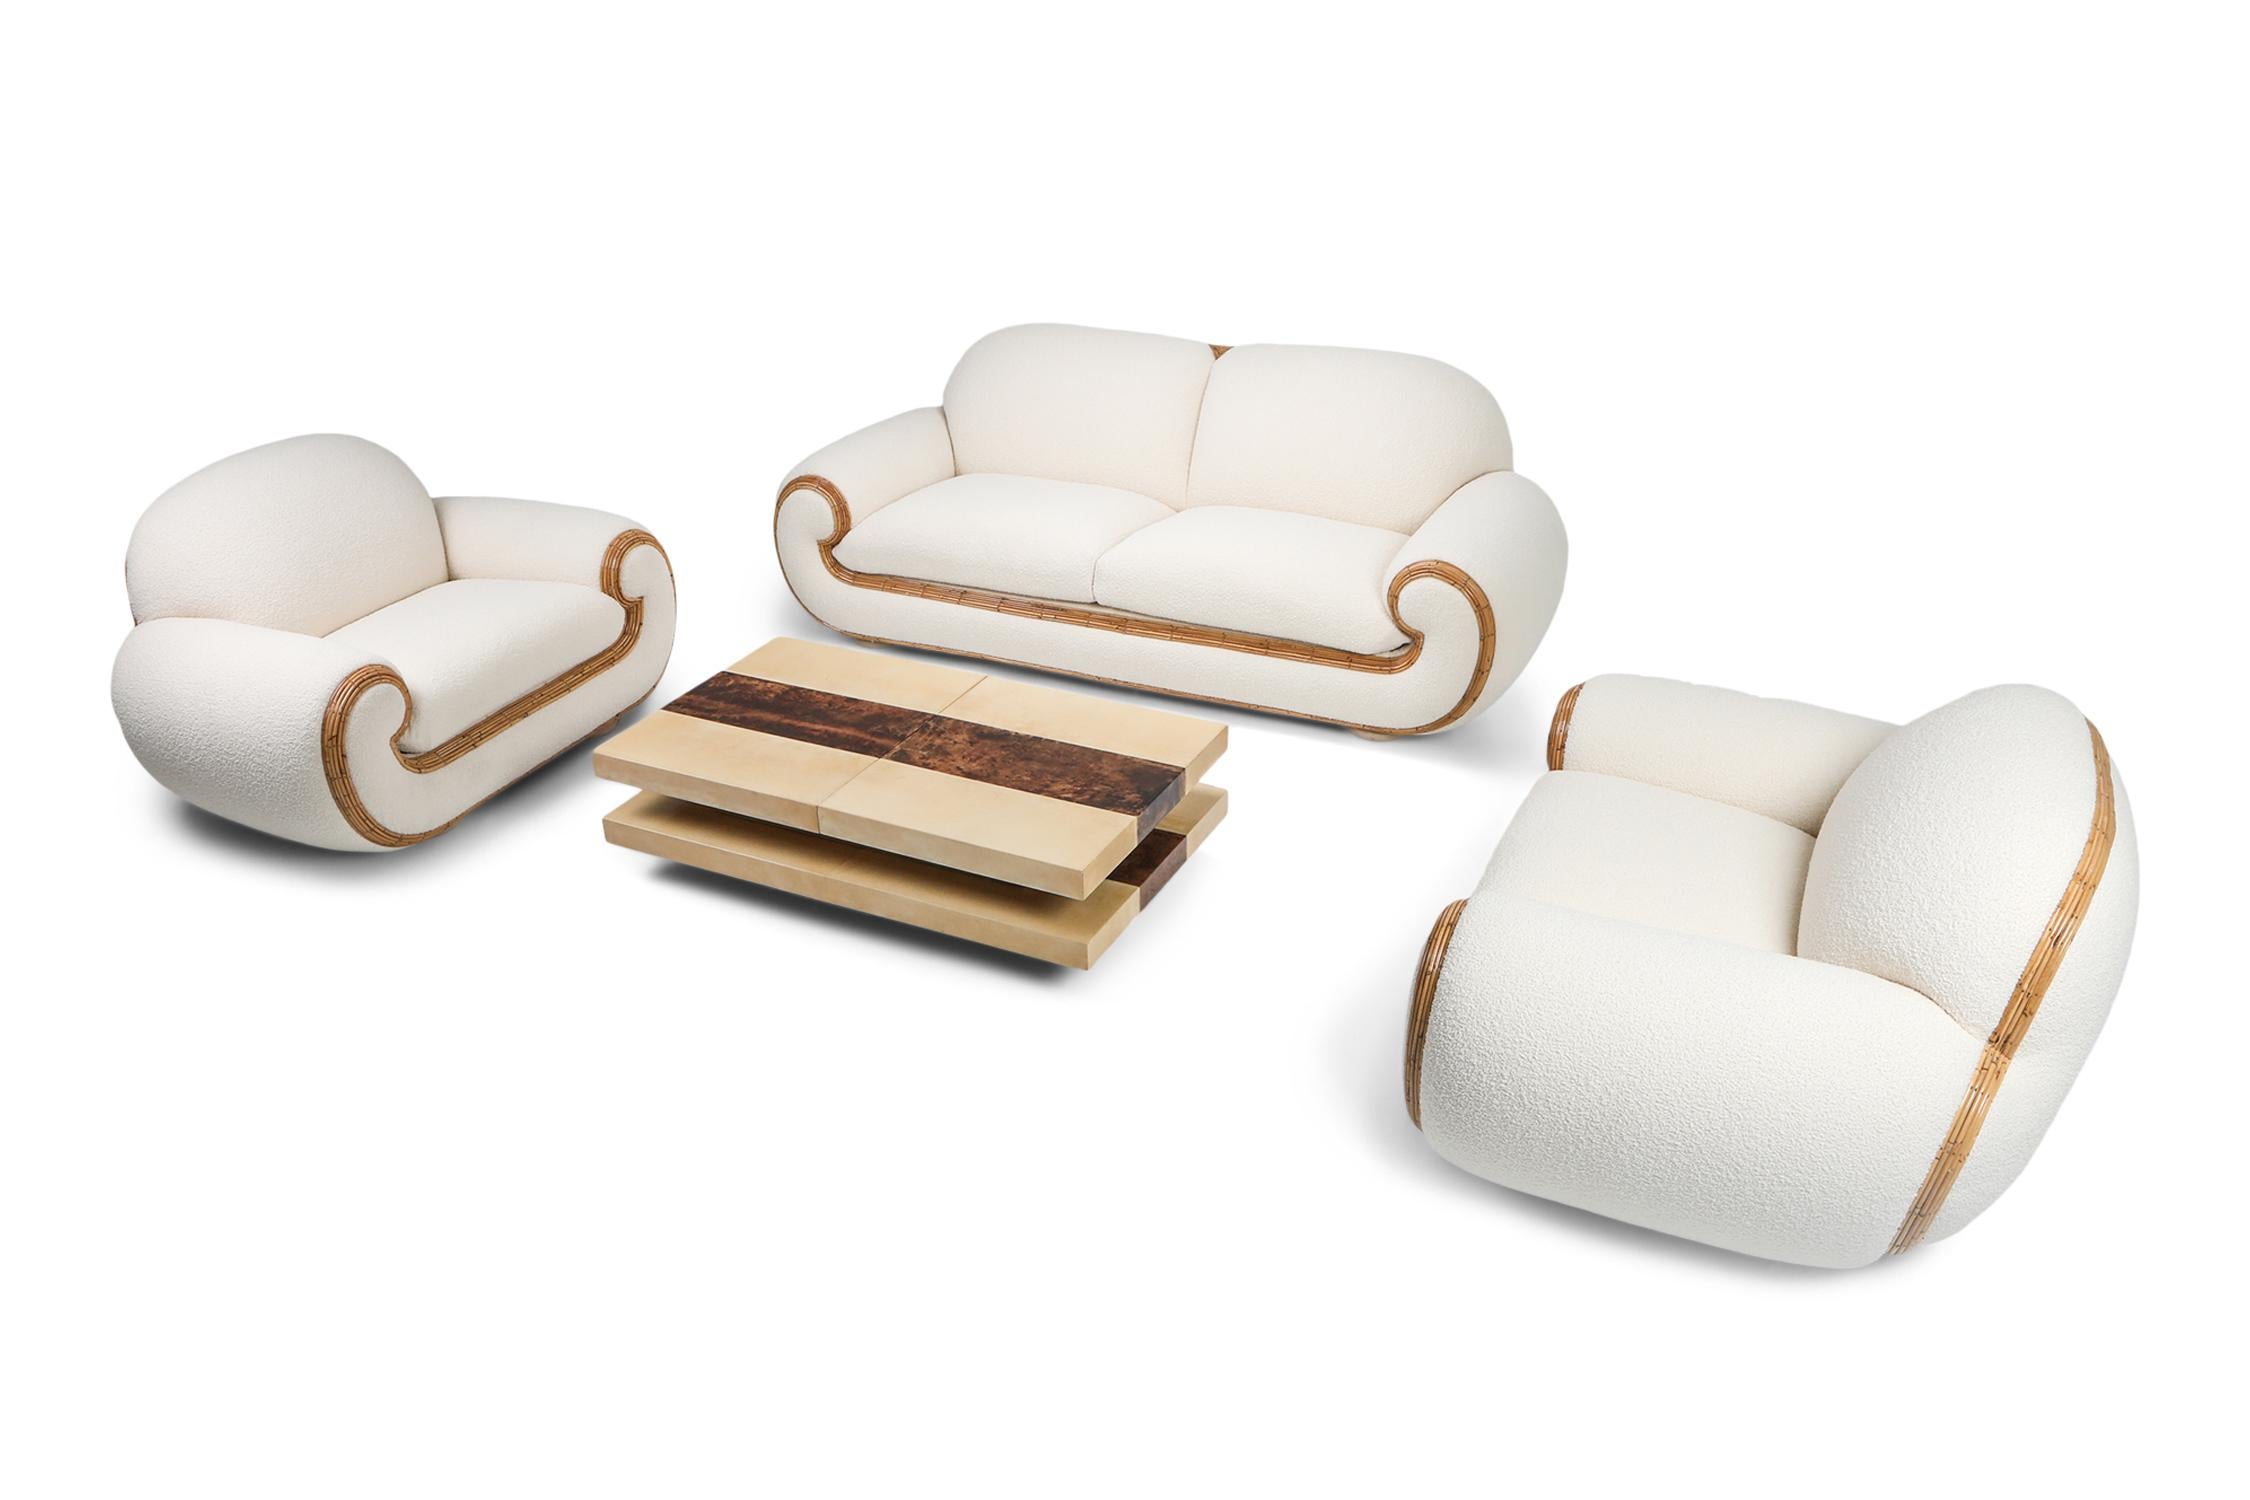 Tropicalist 1970s Italian version of the Ours Polaire sofa set by Jean Royère.
Magnificent pieces with impressive quality and dimensions.
The set consist of two matching club chairs and one large couch.
They are presented in the added picture